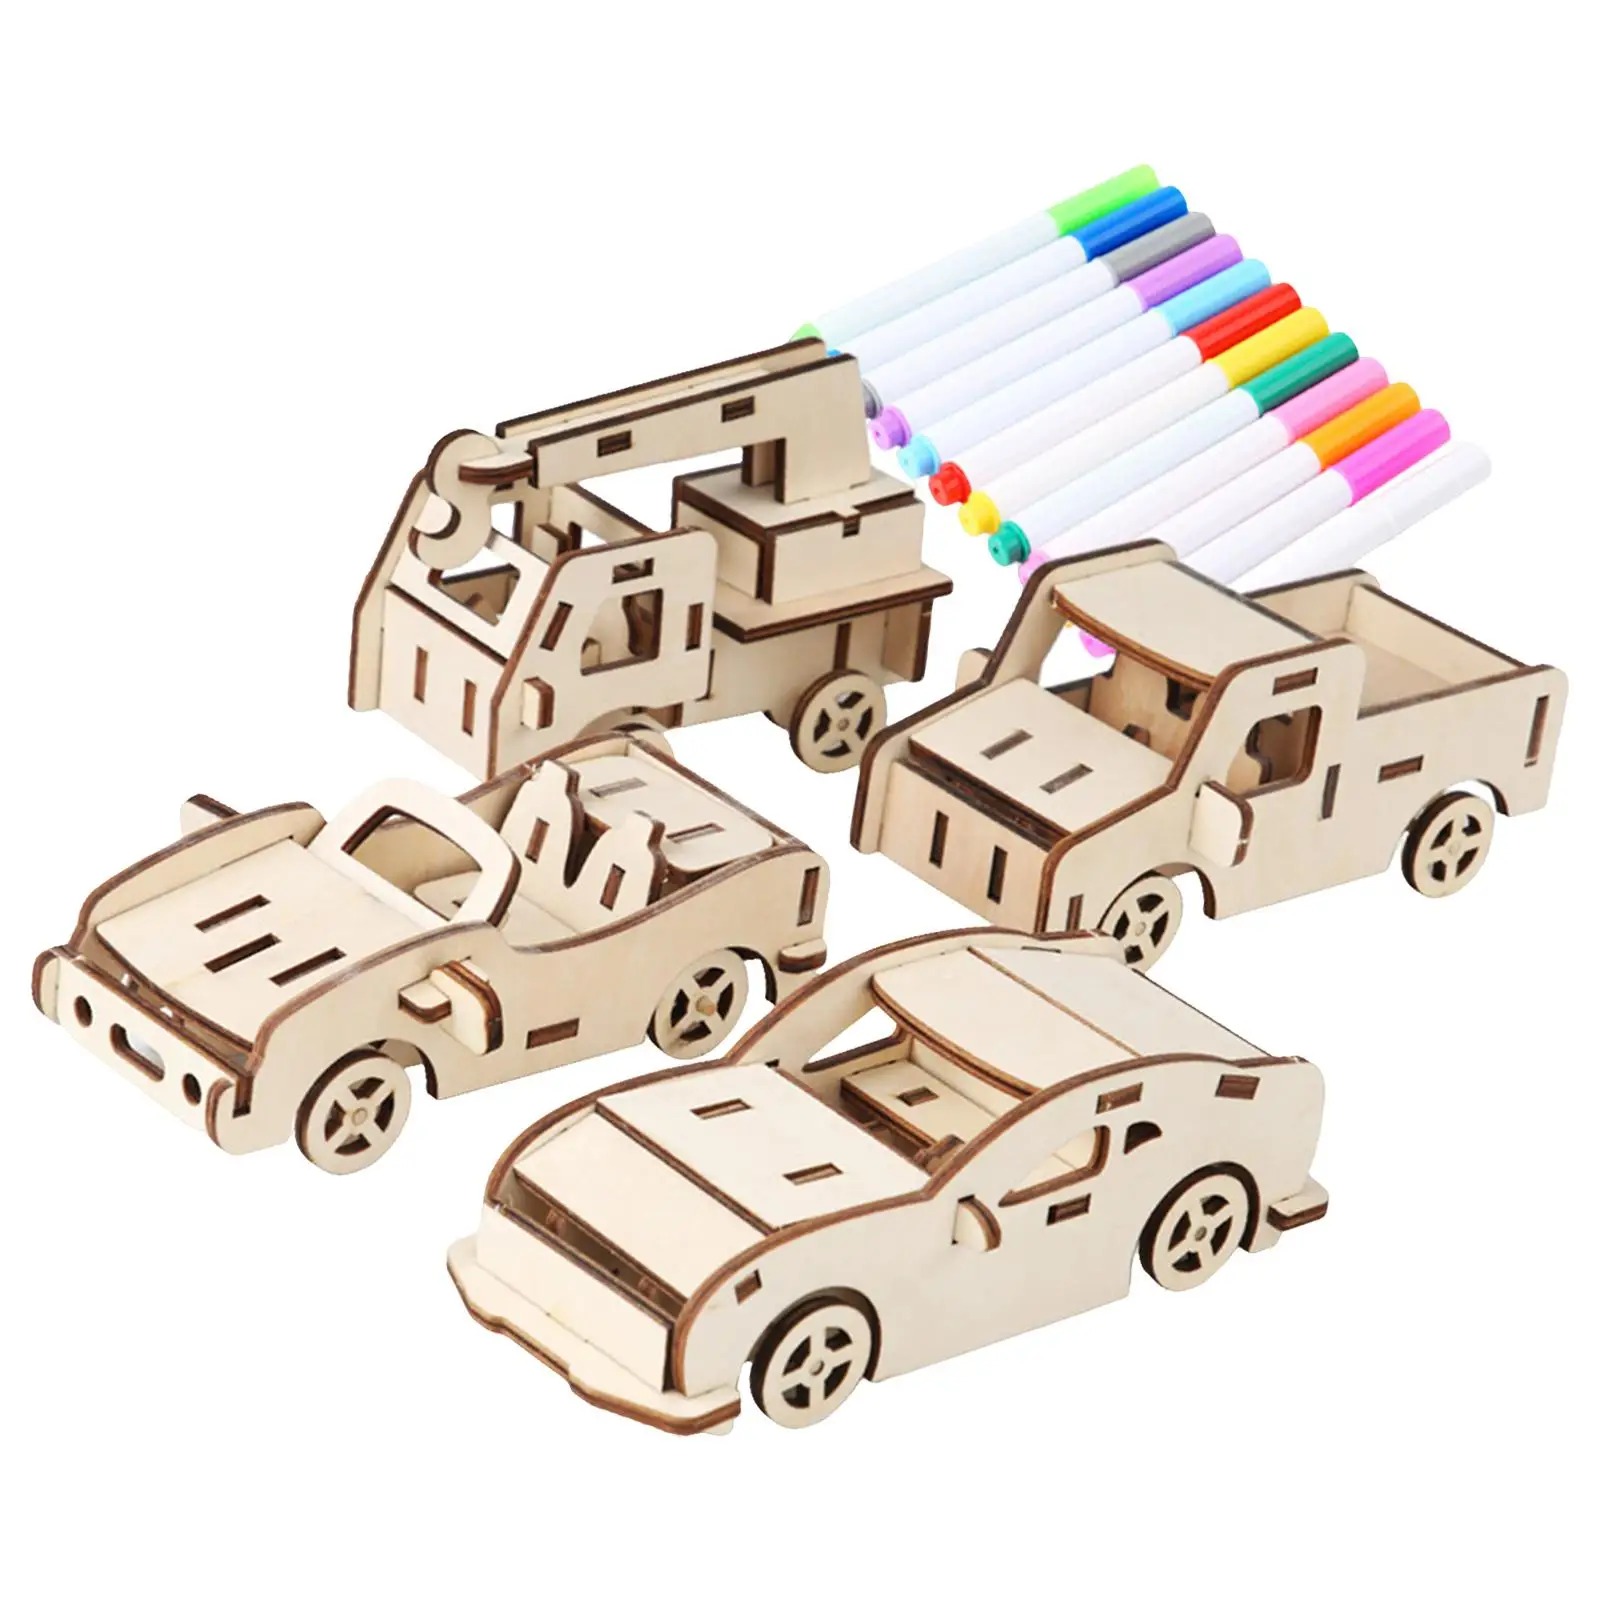 Model Car Kits Fun Assembly Construction Kit Toy Creative DIY Toy Model Building Kit Game 4 Set for Birthday childrens Teens